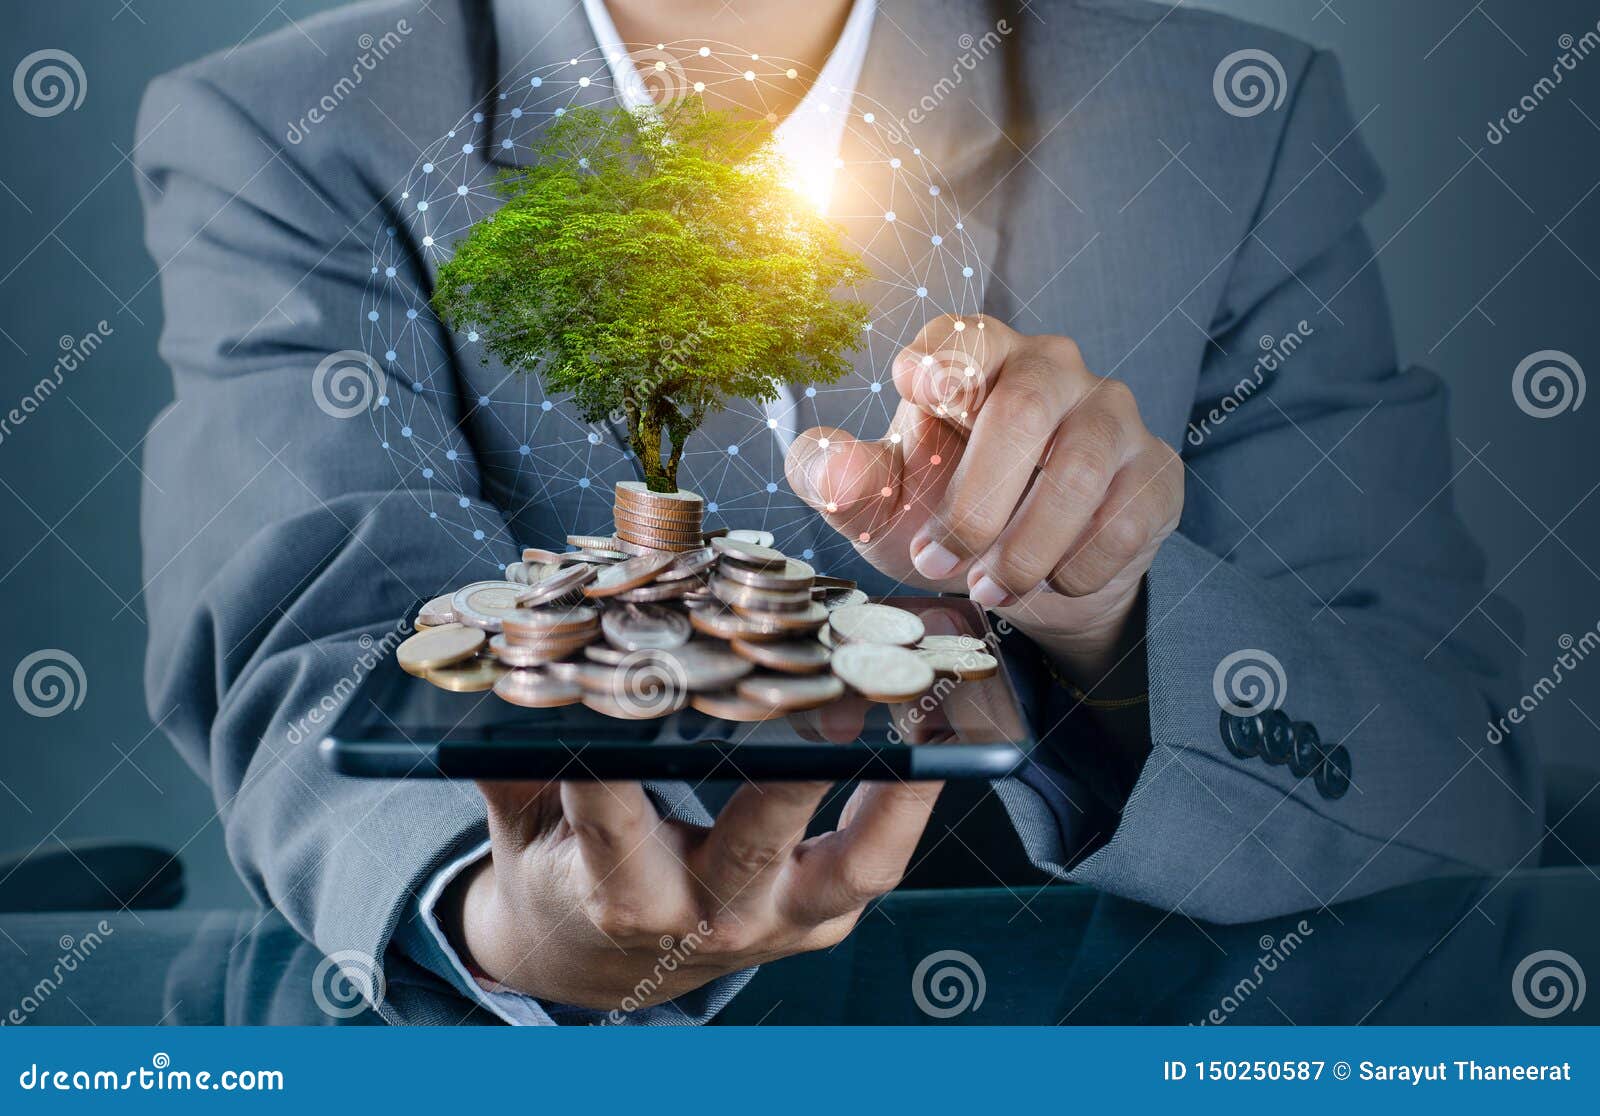 hand coin tree the tree grows on the pile. saving money for the future. investment ideas and business growth background with bokeh